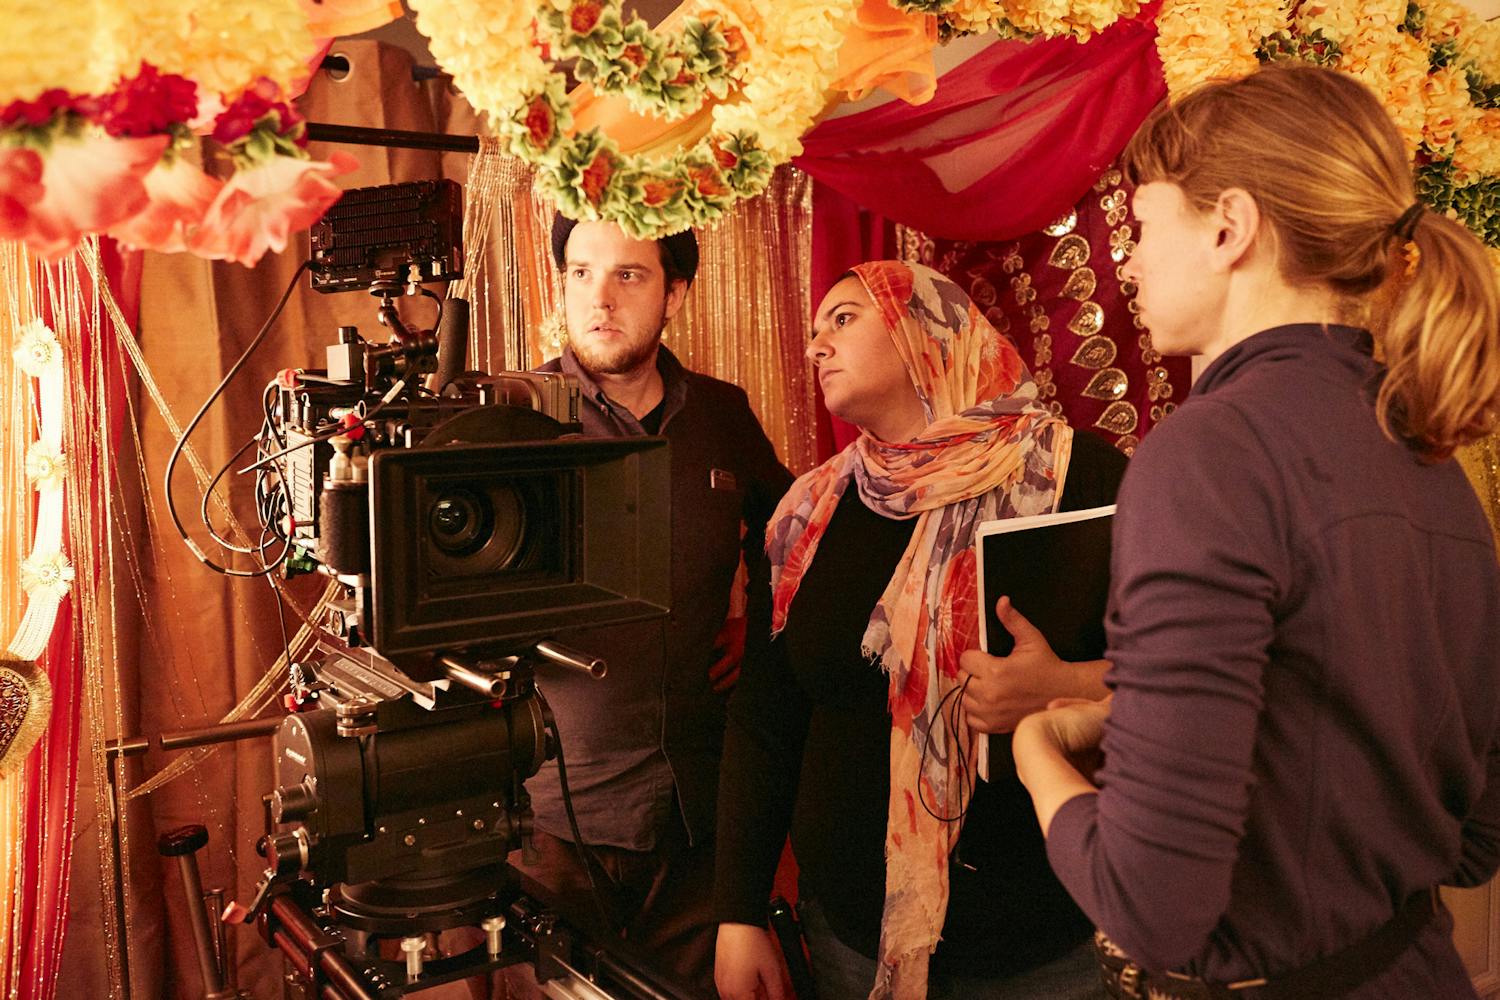 UF lecturer Iman Zawahry sets up a shot on set of ‘Americanish’ by looking through the viewfinder.